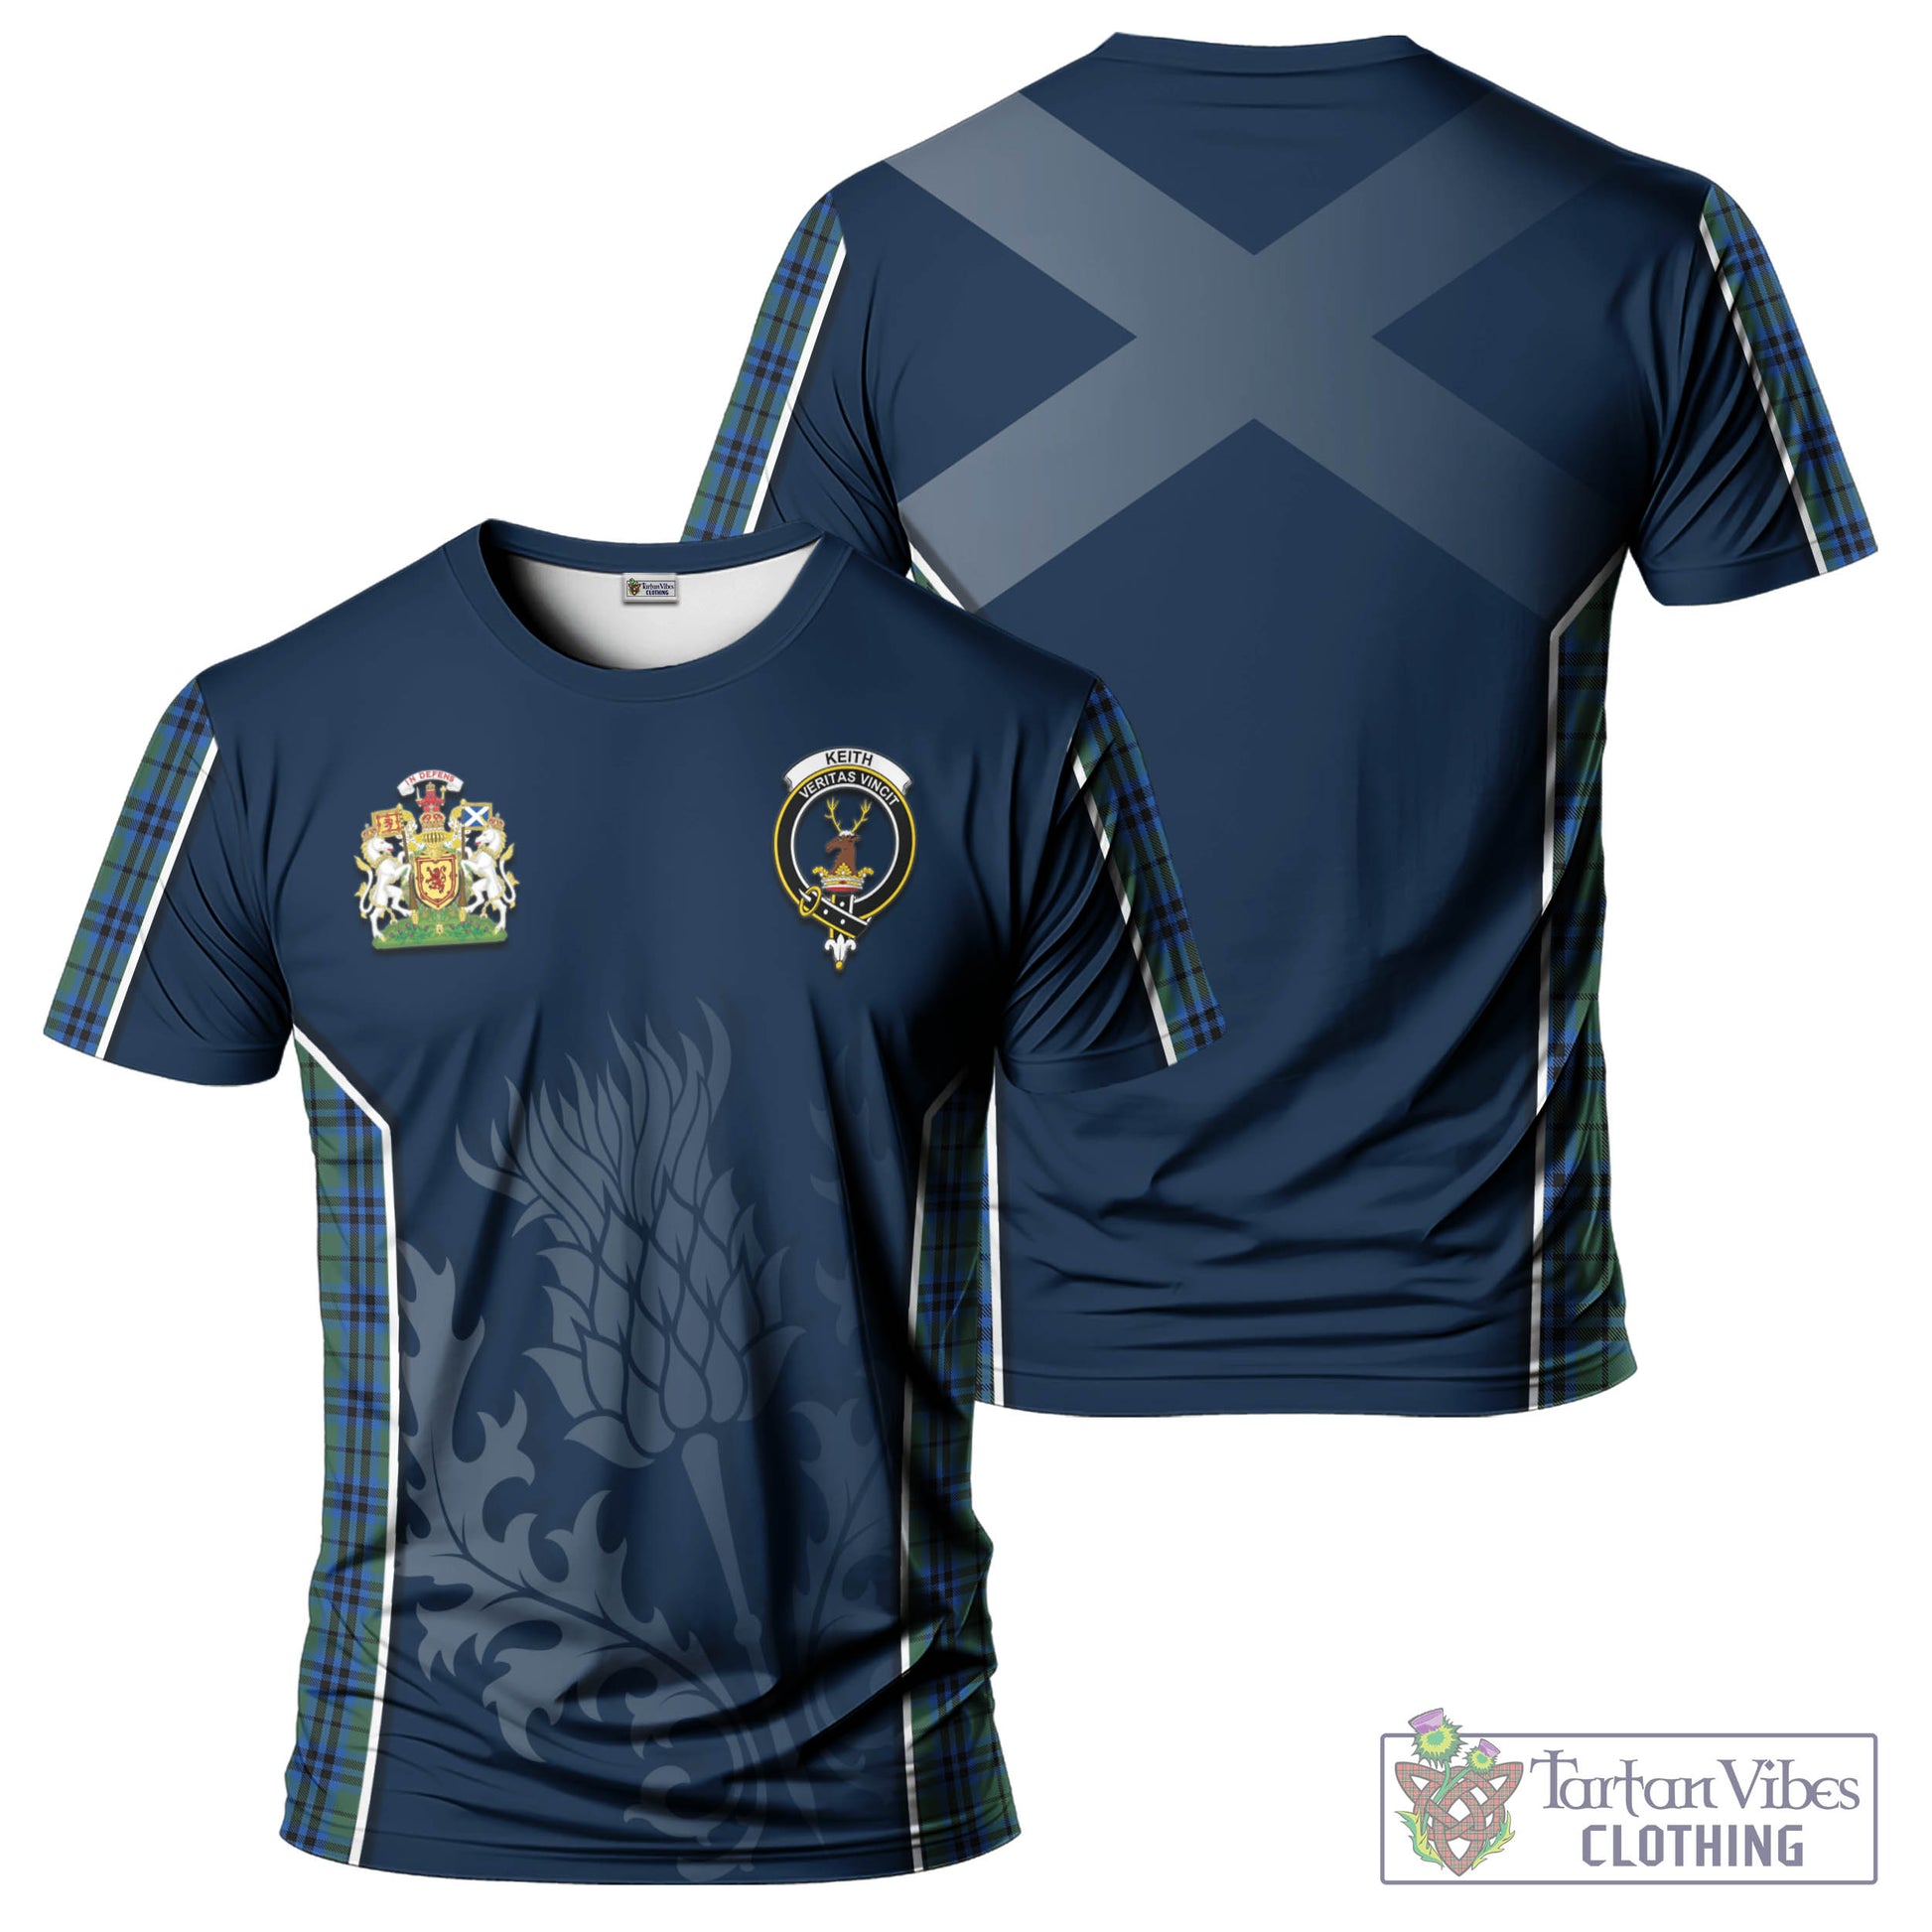 Tartan Vibes Clothing Keith Tartan T-Shirt with Family Crest and Scottish Thistle Vibes Sport Style